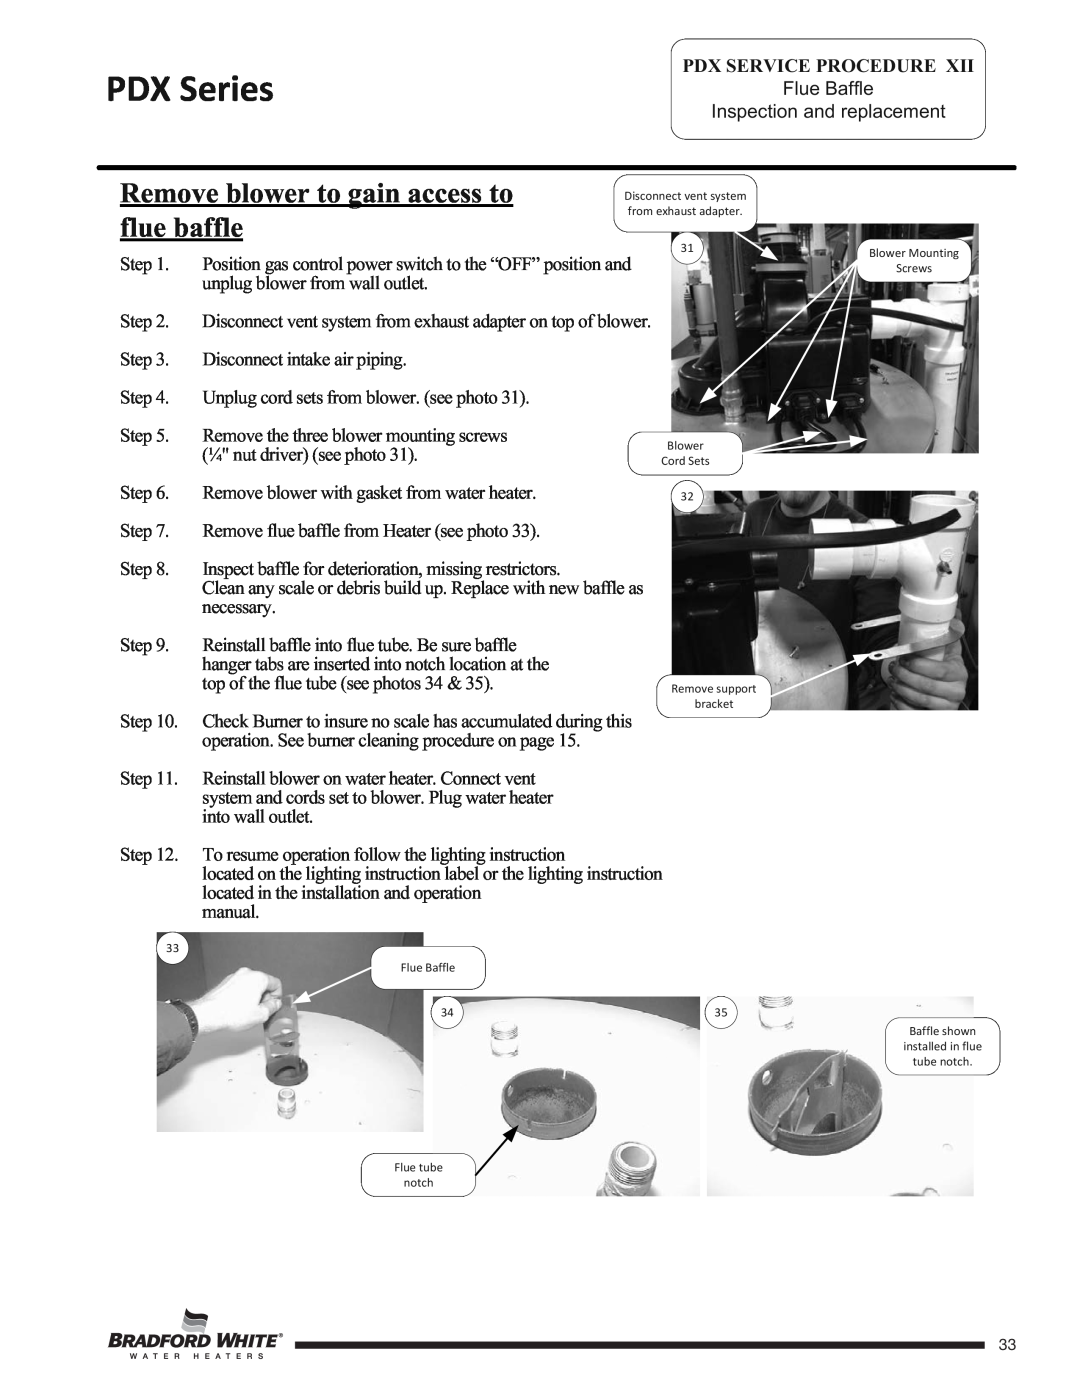 Honeywell PDX440S*F(BN,SX) service manual Remove blower to gain access to flue baffle, PDX Series, Pdx Service Procedure 